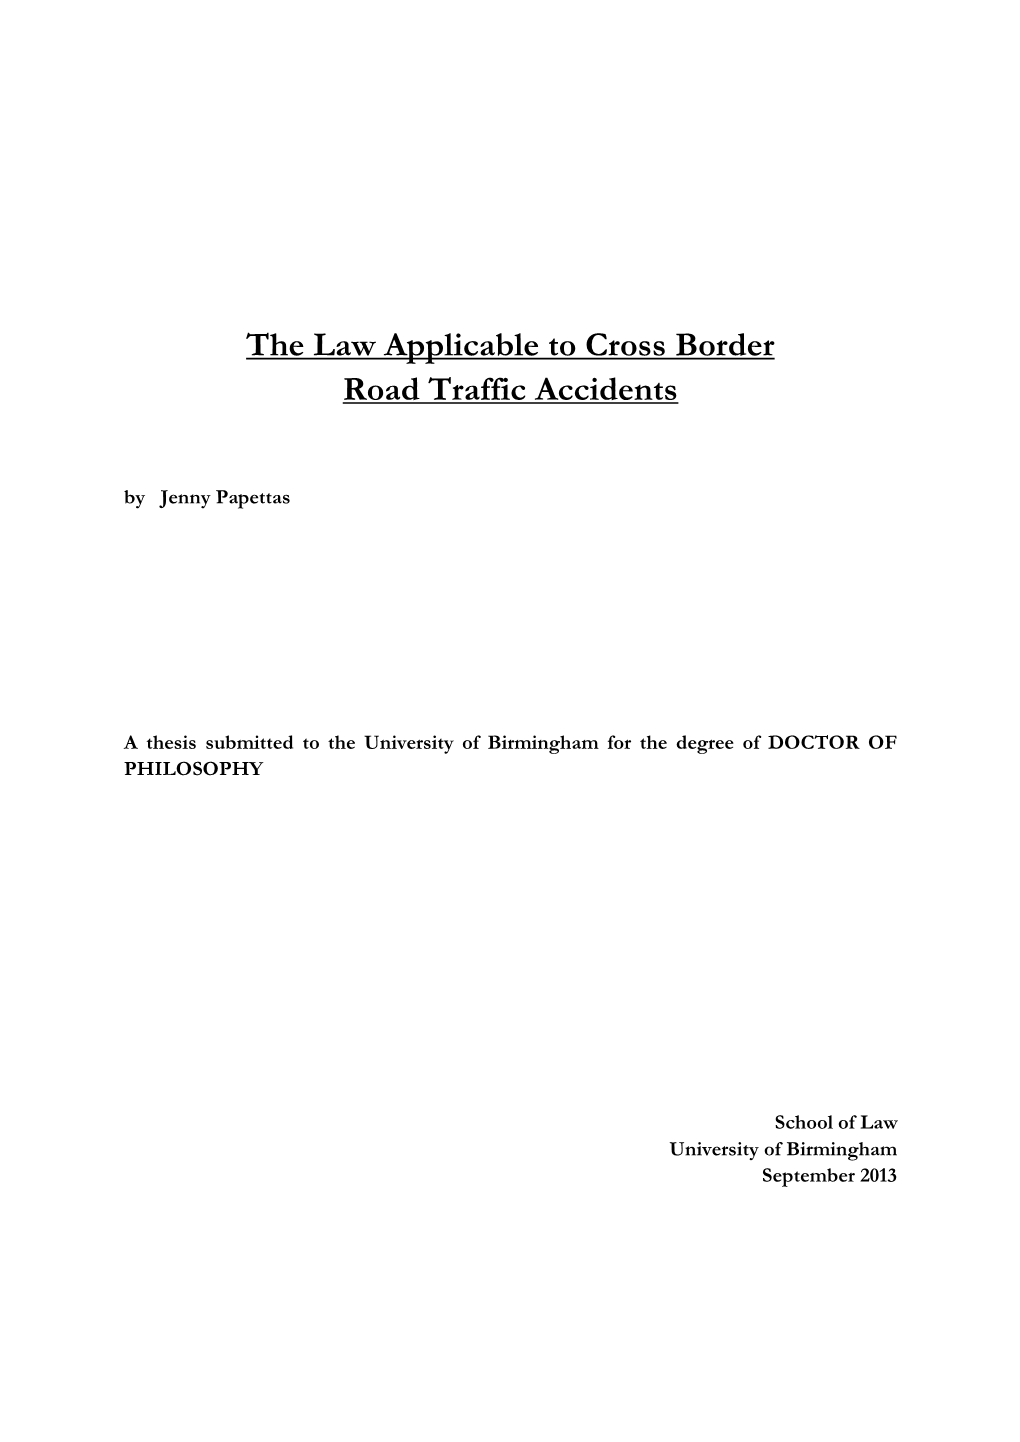 The Law Applicable to Cross Border Road Traffic Accidents